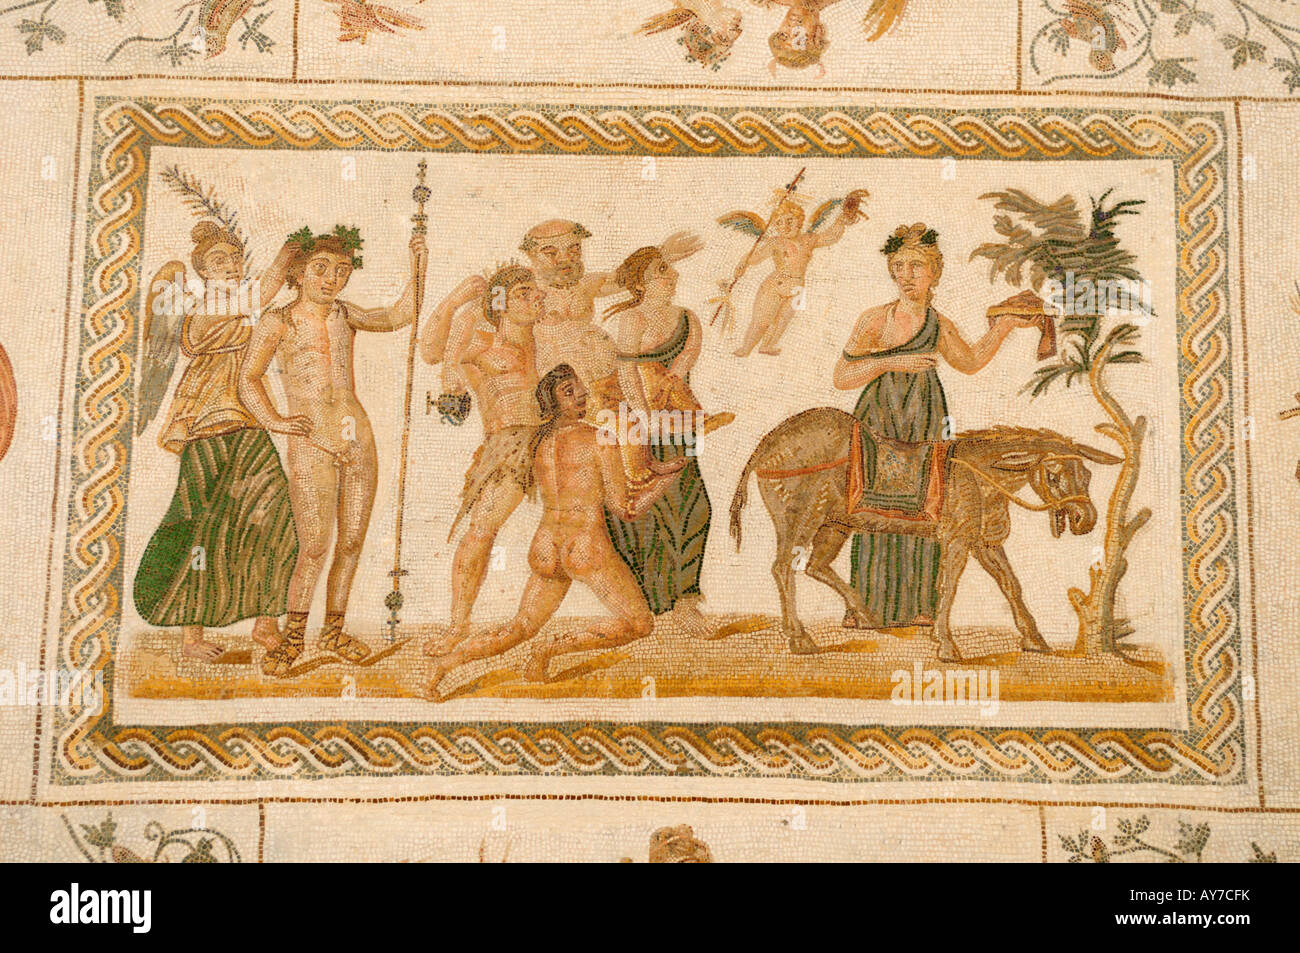 Mosaic depicting the Crowning of Dionysus and Silenius being carried towards a Donkey, Archaeology museum, El Jem Tunisia Stock Photo